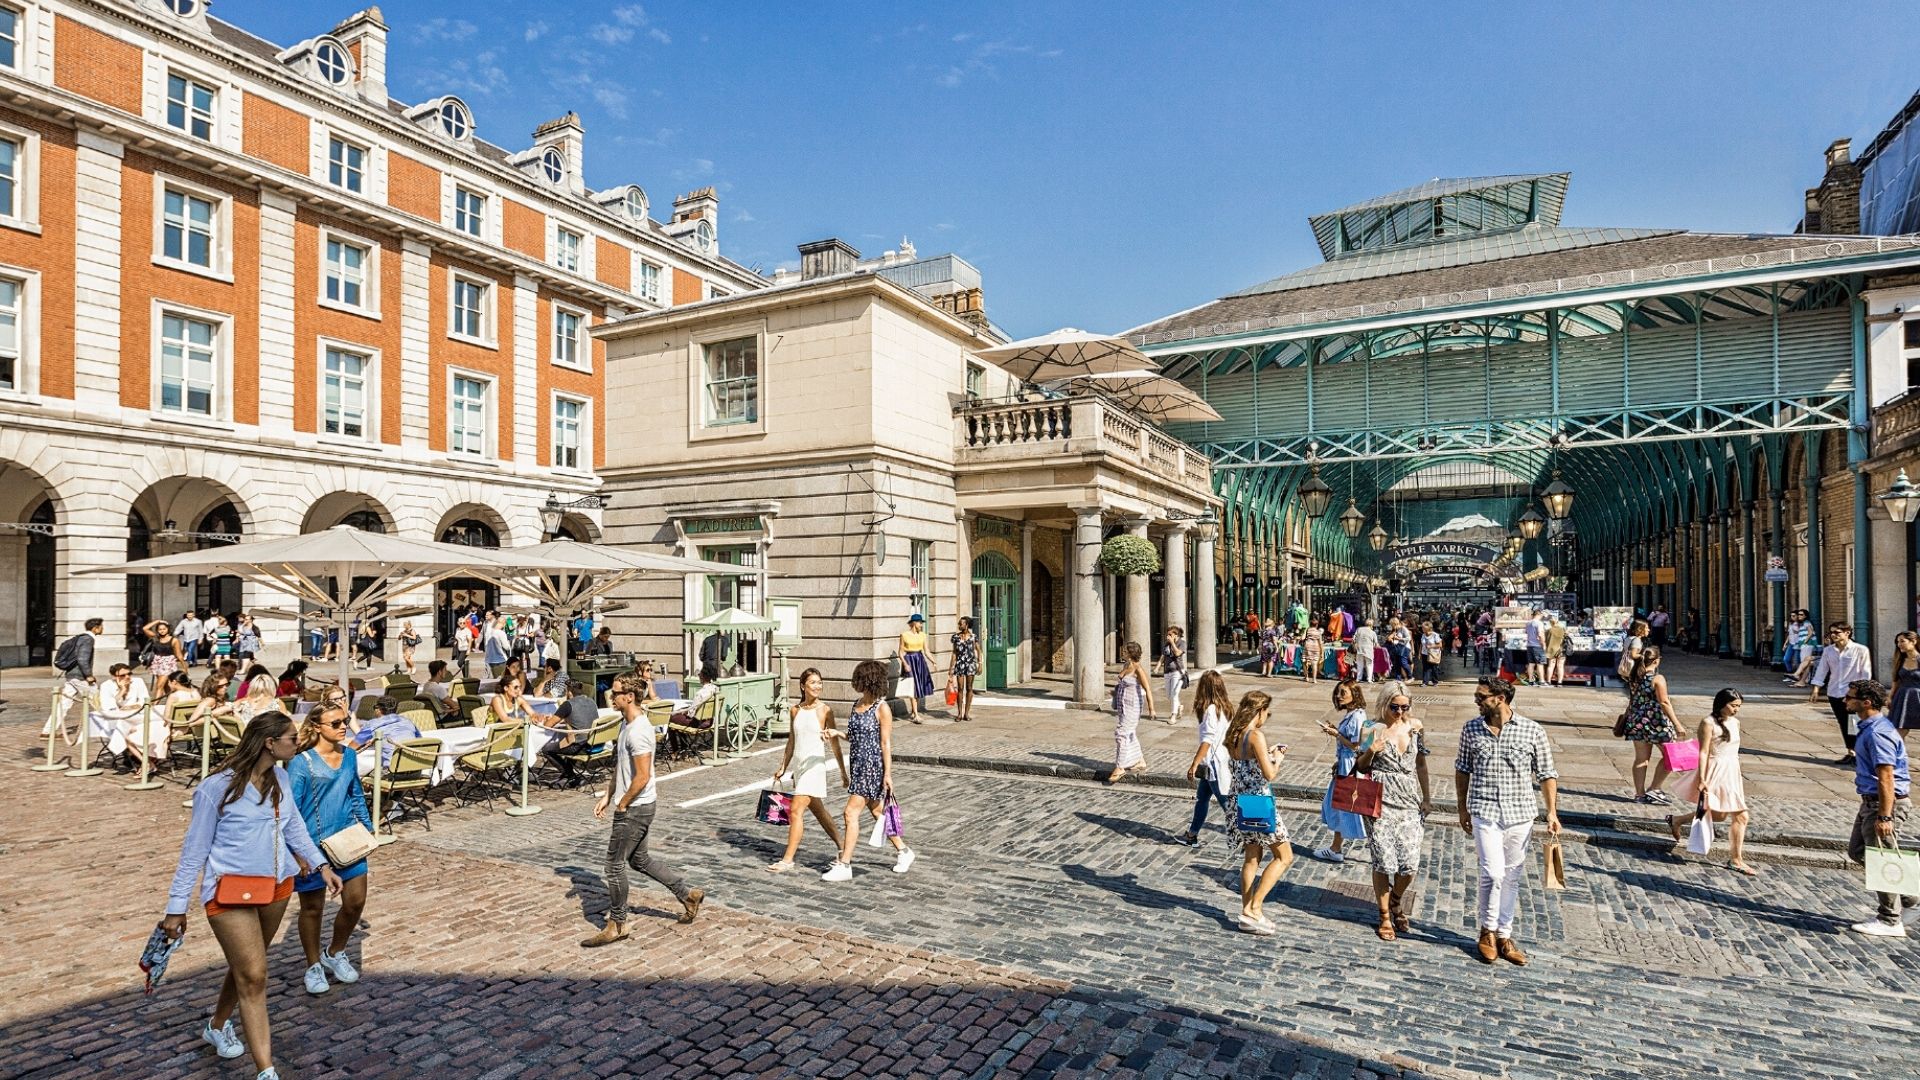 Things to do in Covent Garden - visitlondon.com